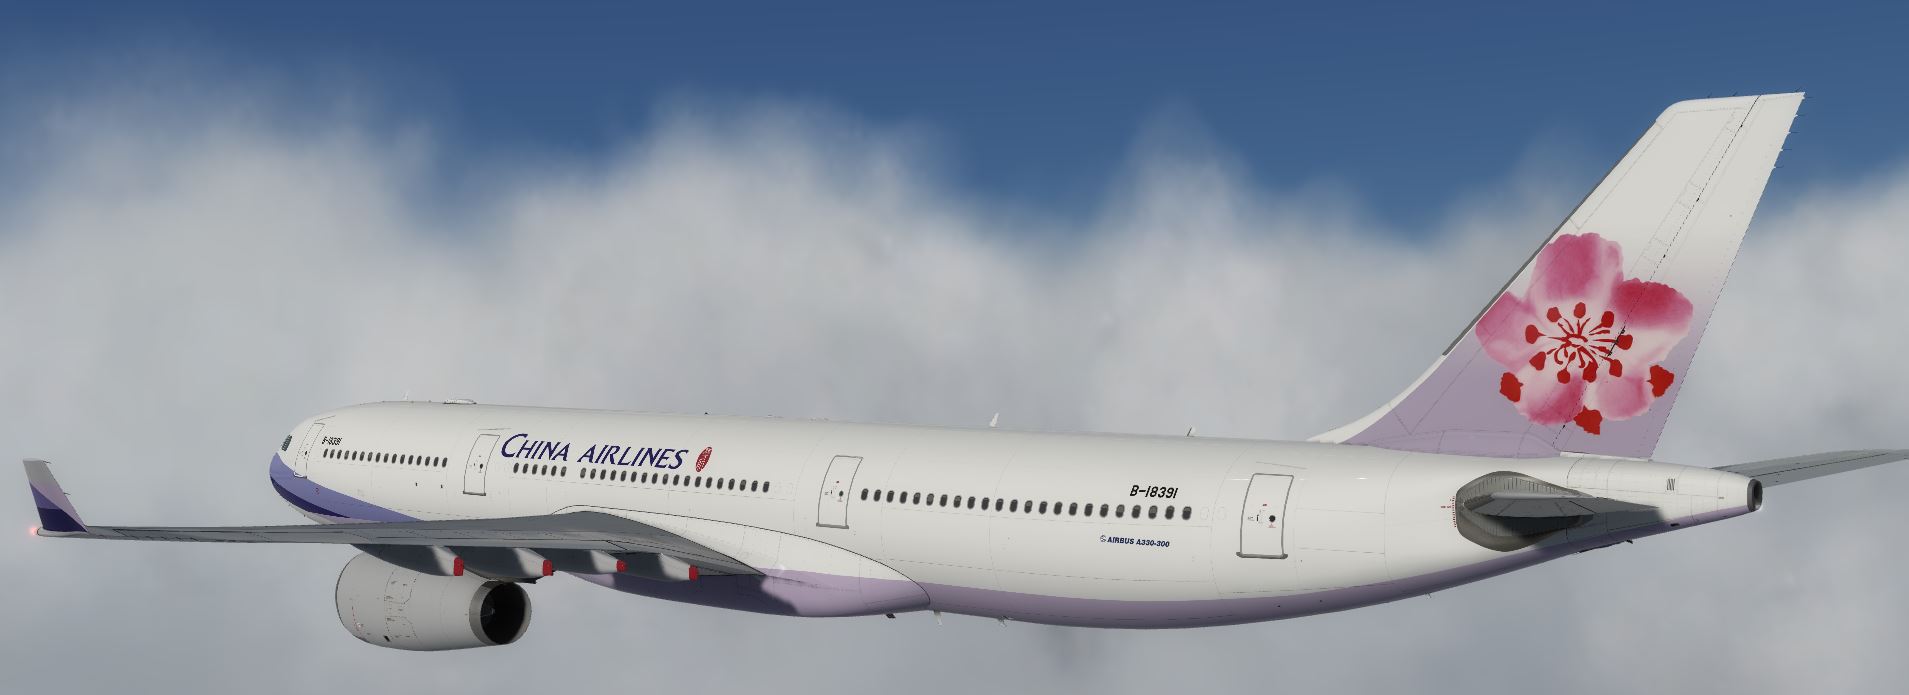 AS A330 ChinaAirline-6614 